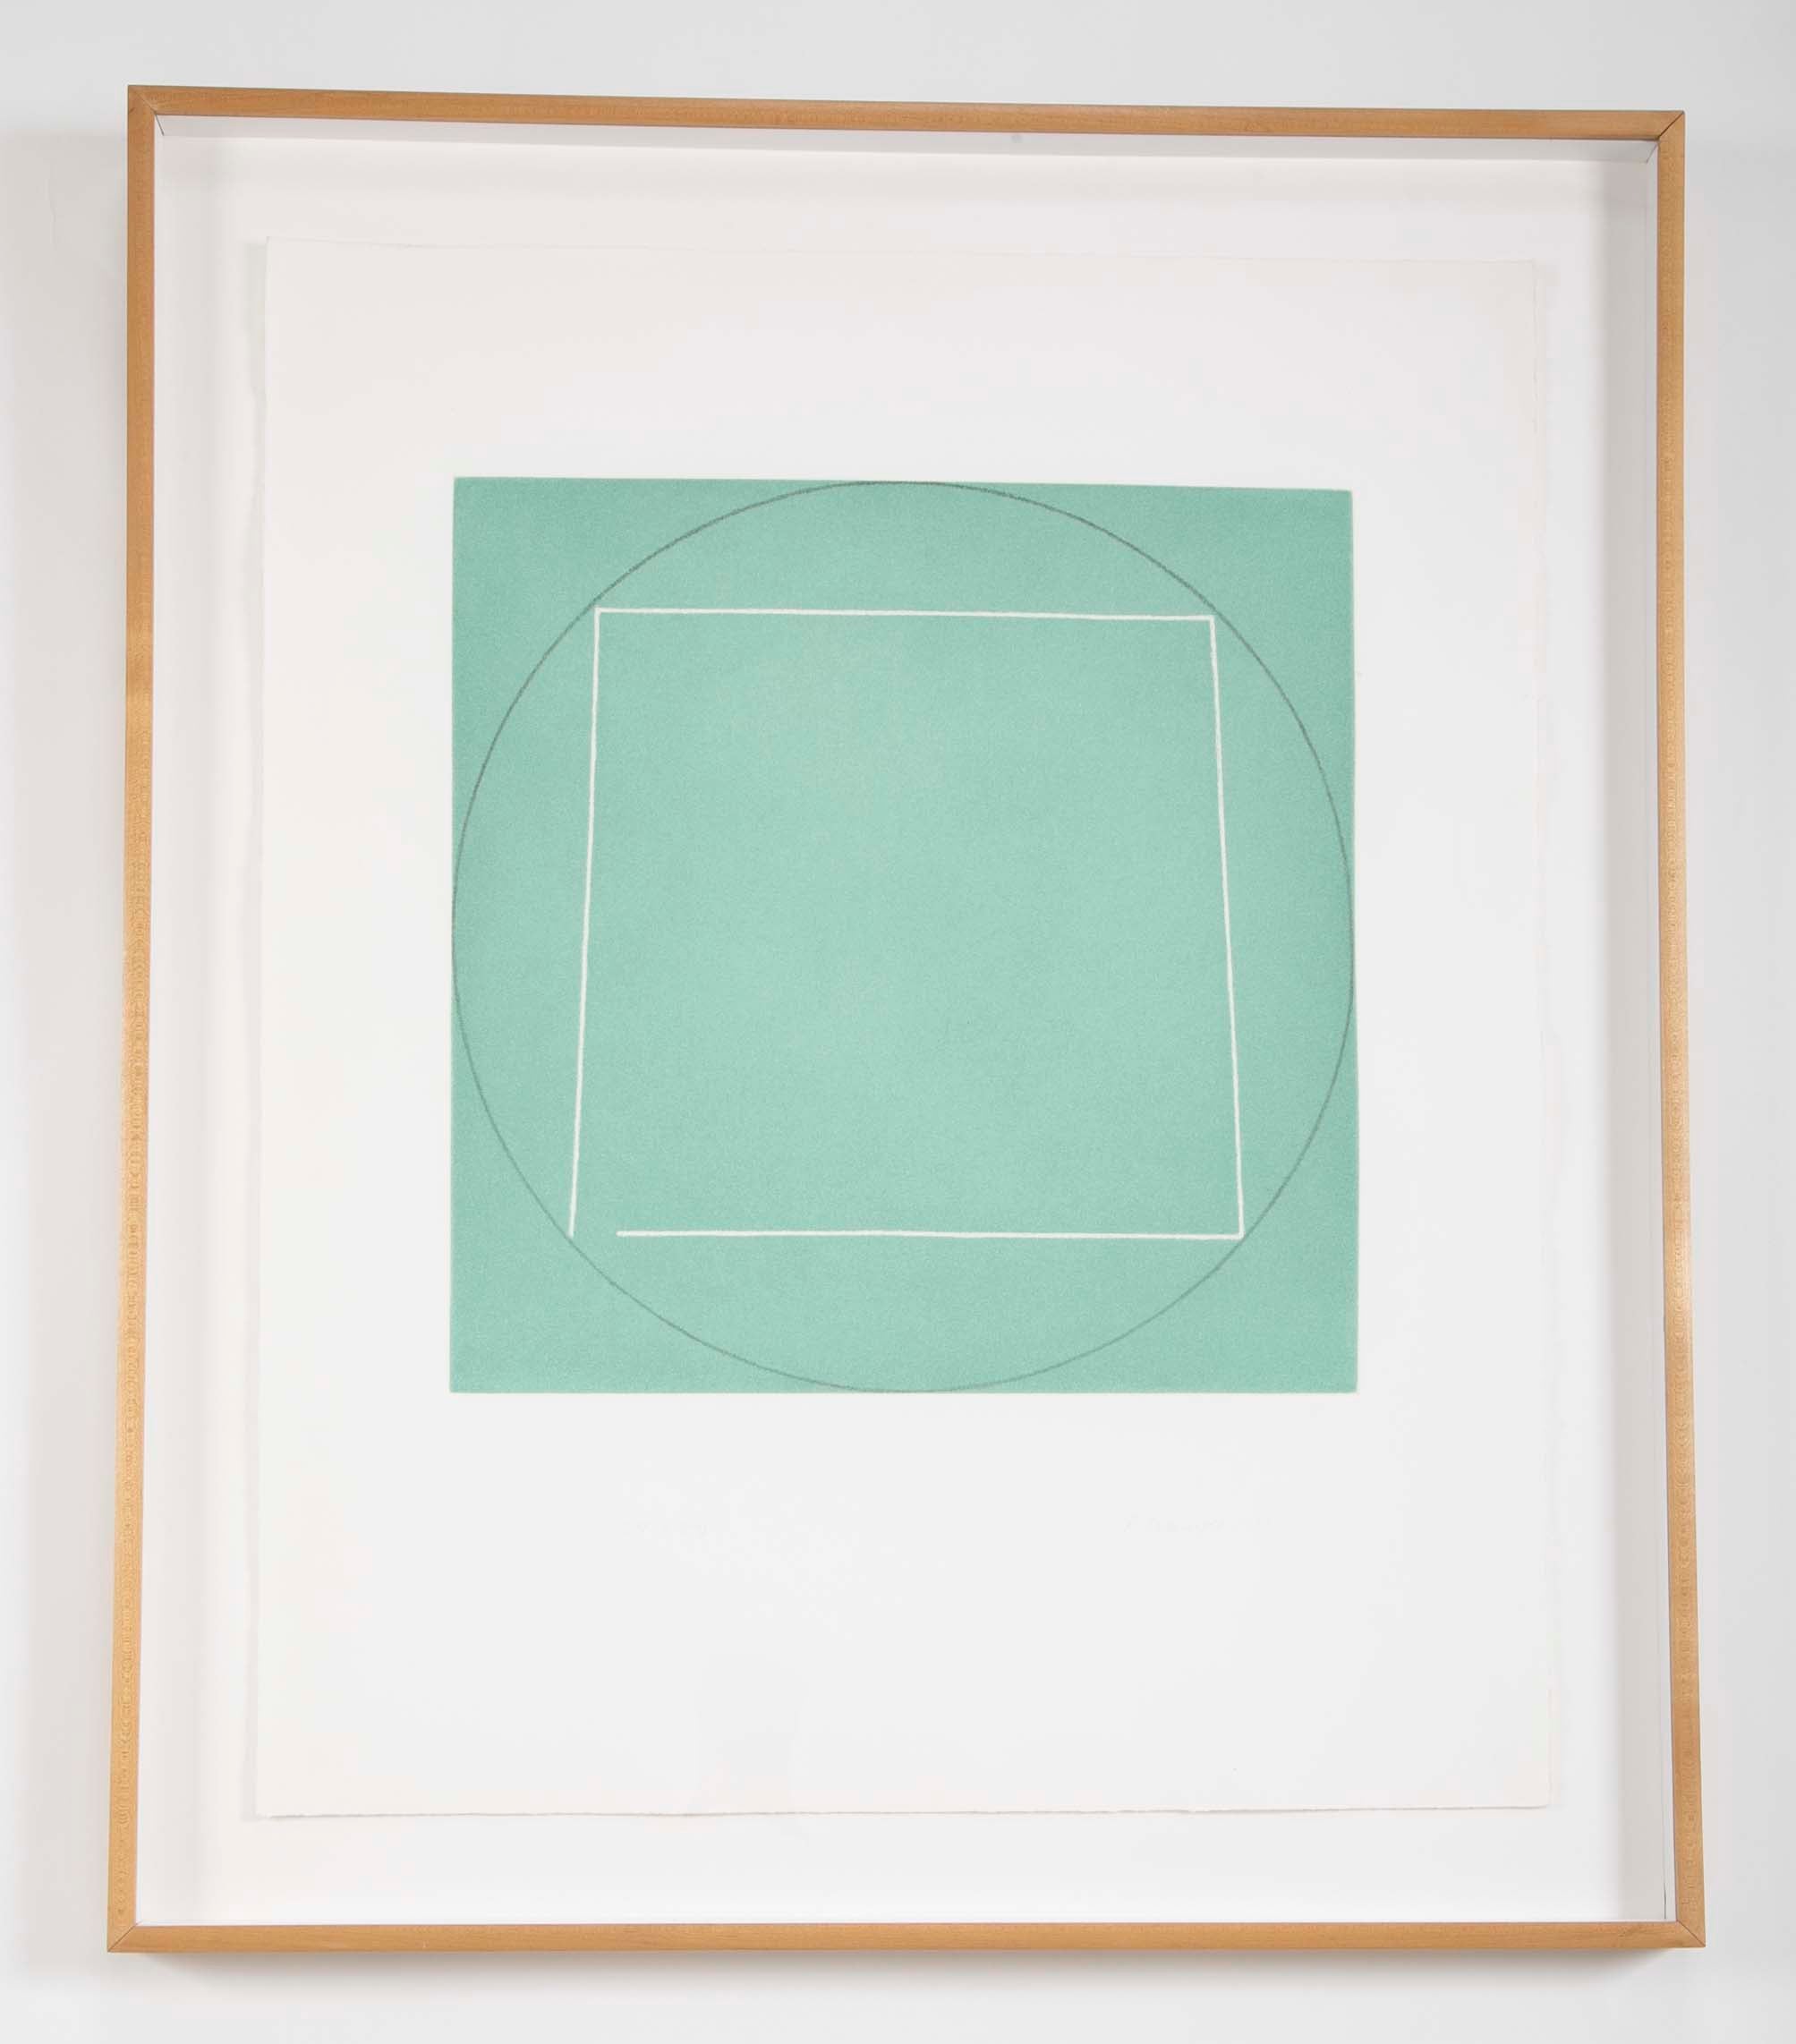 Robert Mangold, Aquatint Etching Titled "Distorted Square Within a Circle"